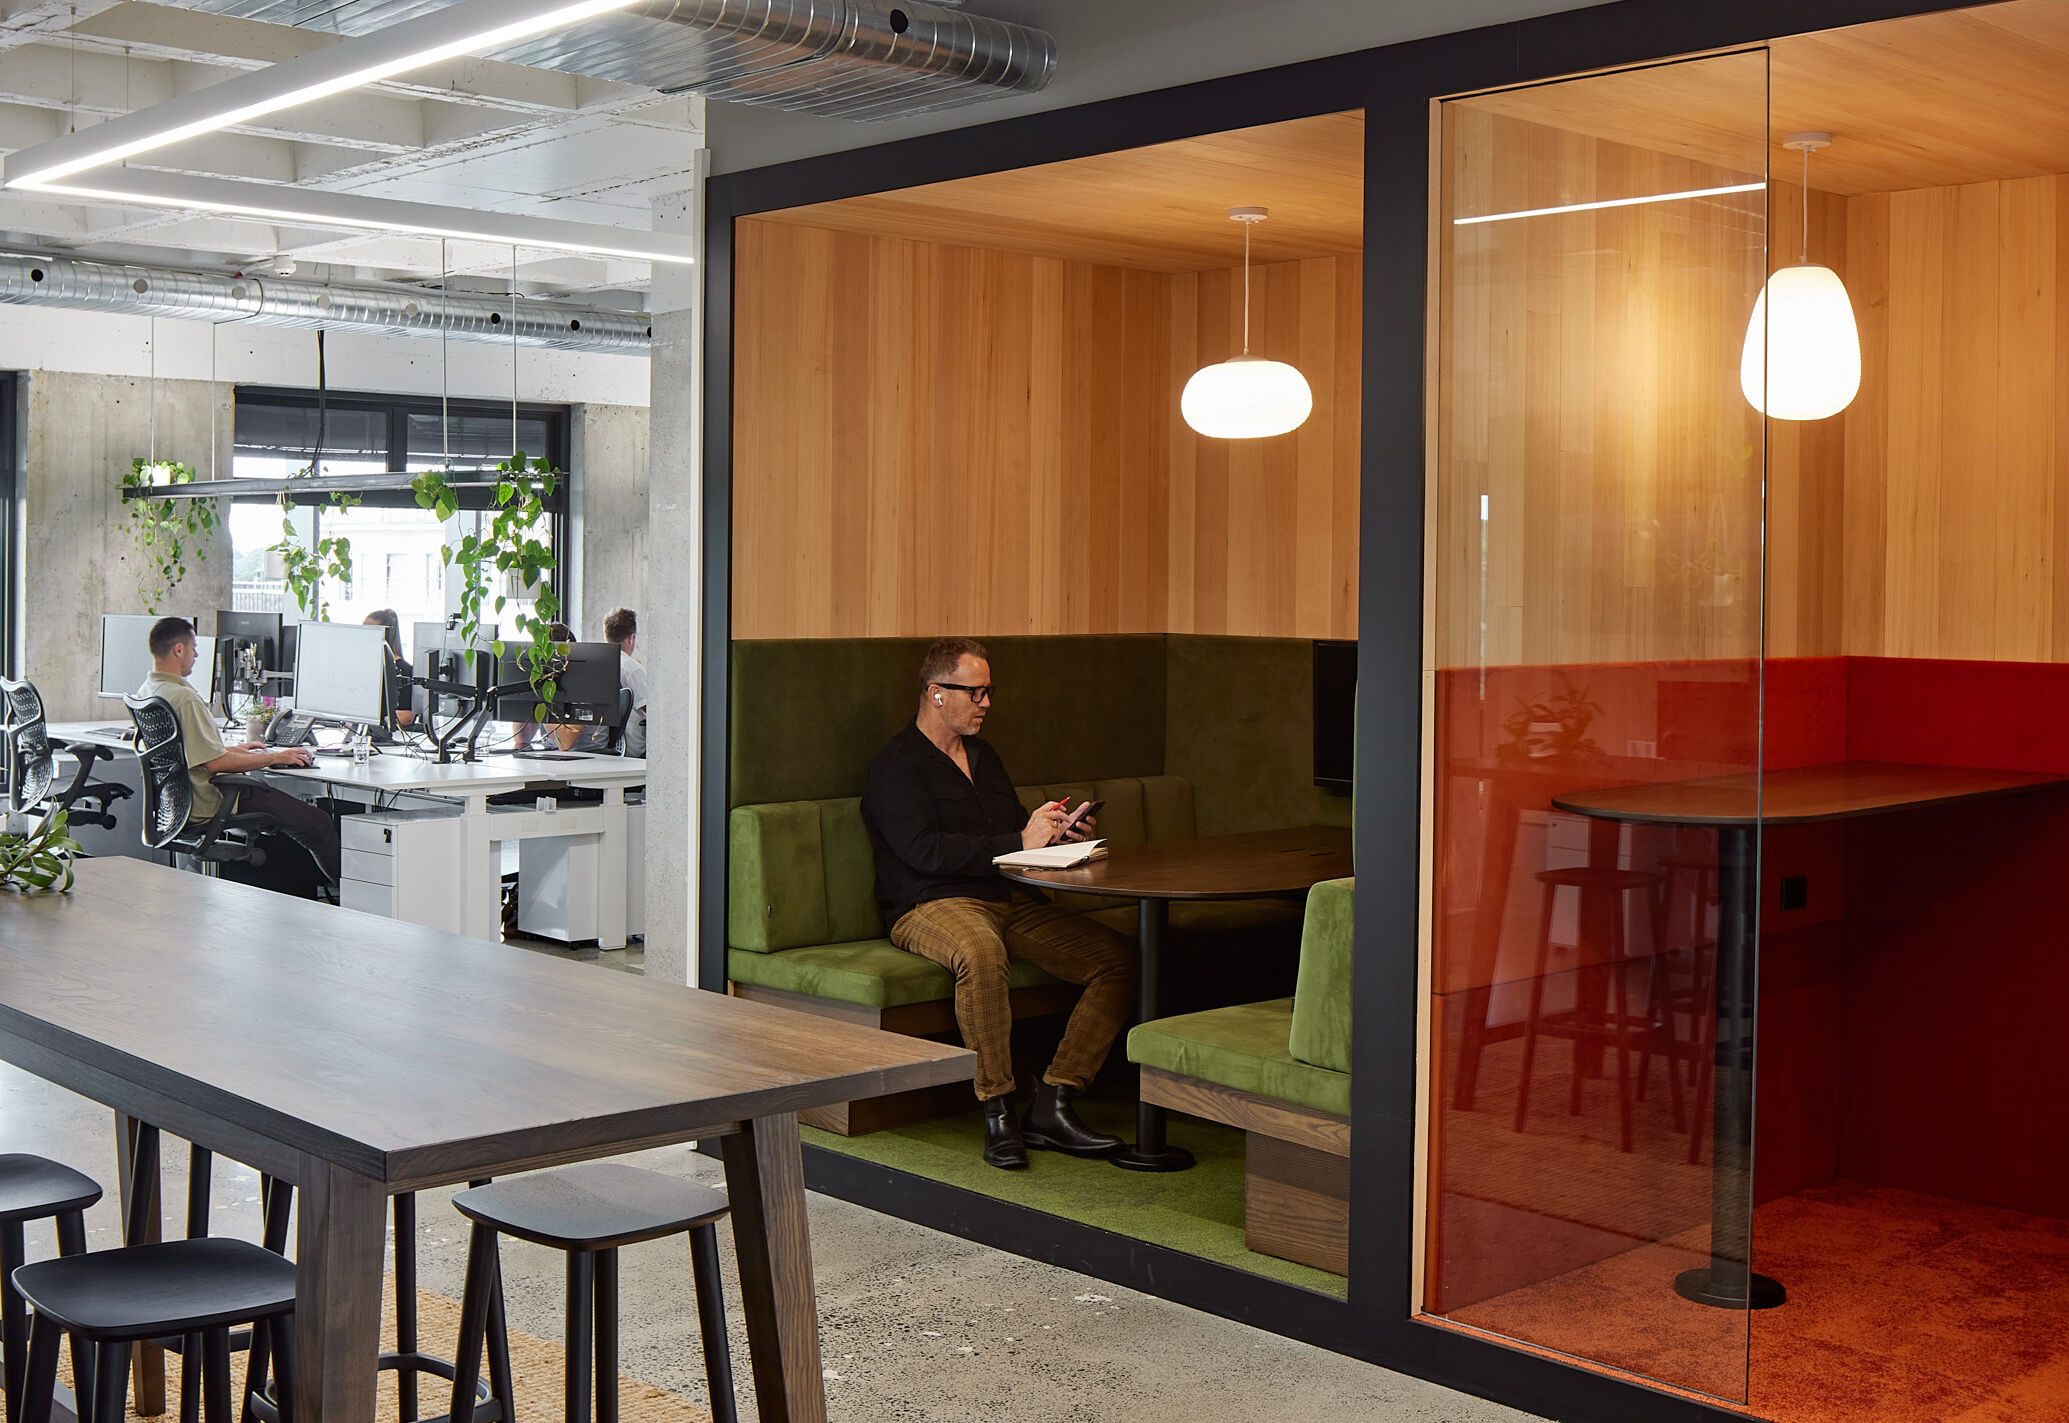 Edwards White Architects own offices with breakout booth seating